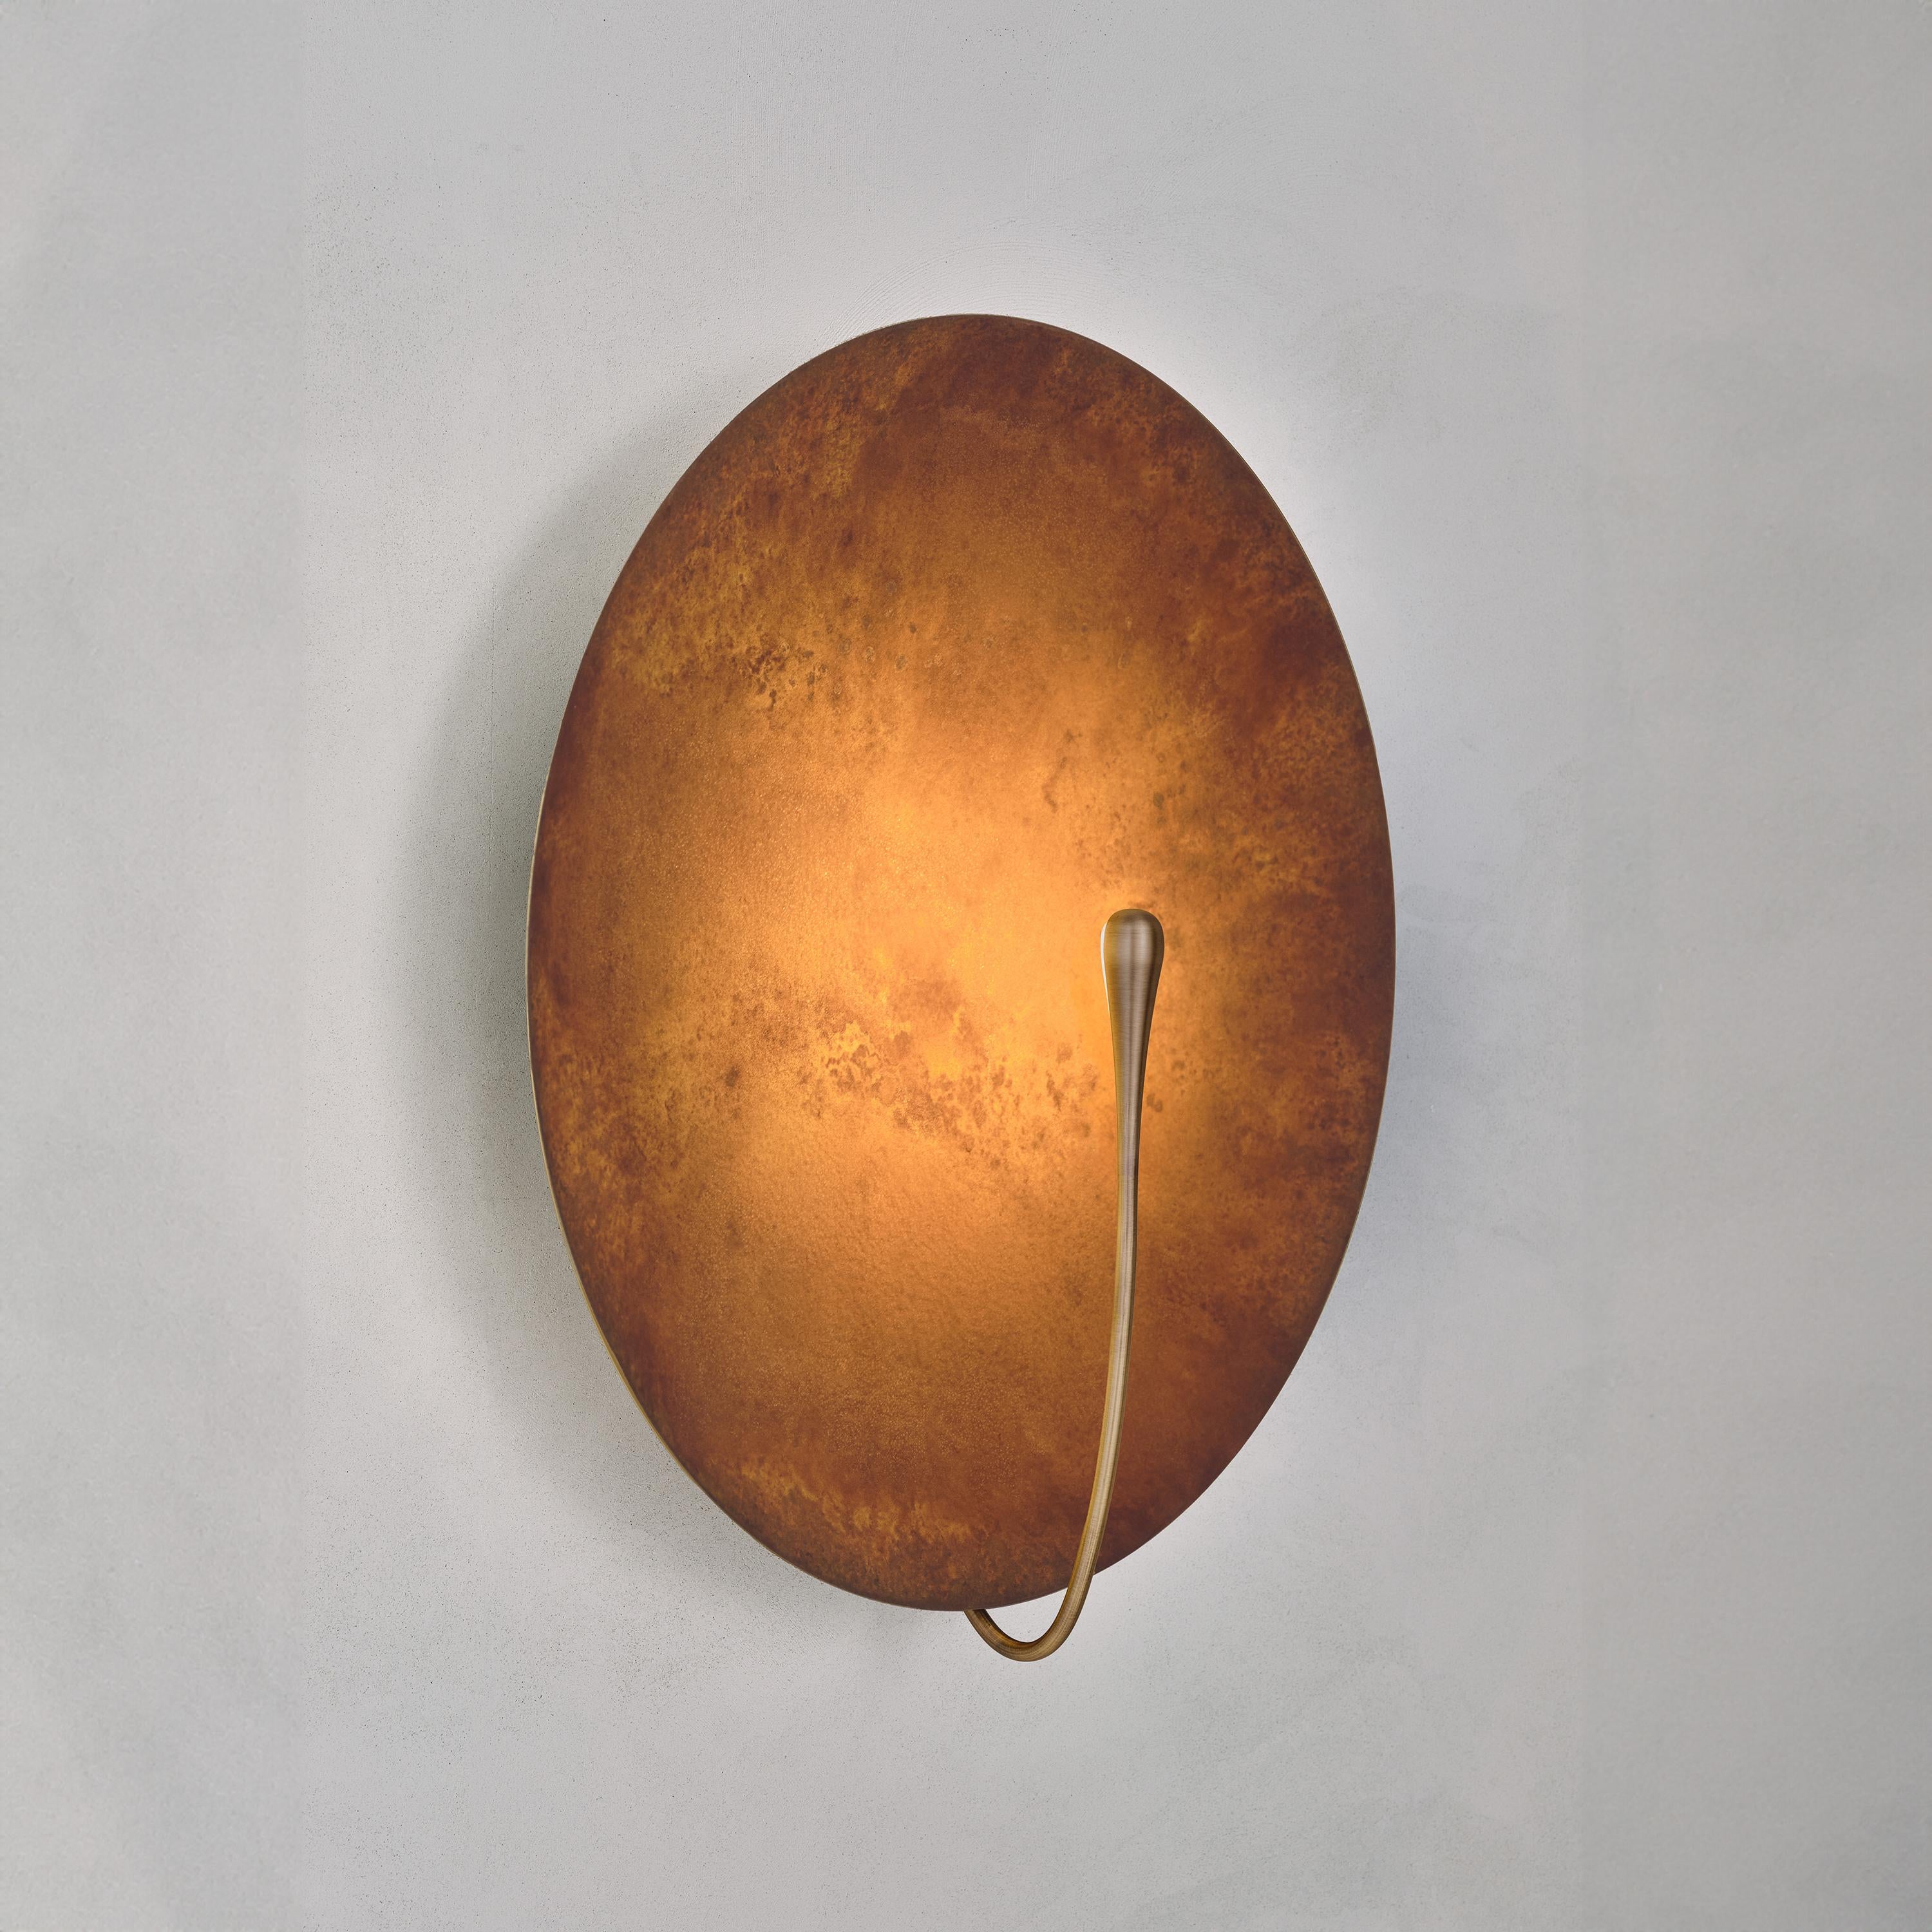 British 'Cosmic Rust XL' Handmade Patinated Brass Contemporary Wall Light Sconce For Sale